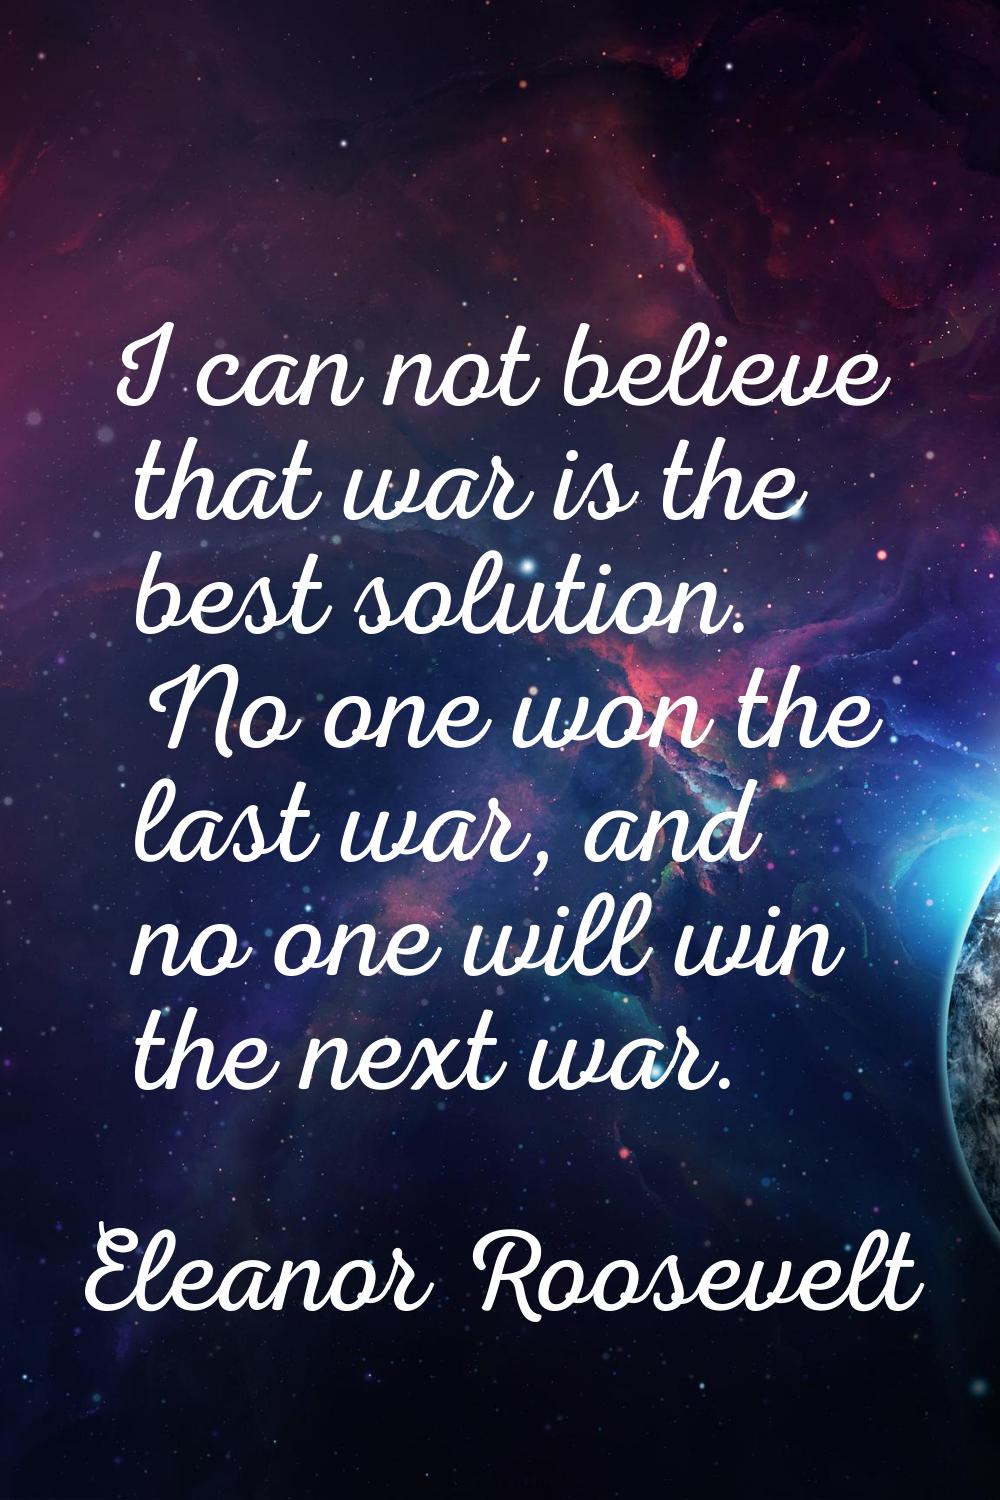 I can not believe that war is the best solution. No one won the last war, and no one will win the n